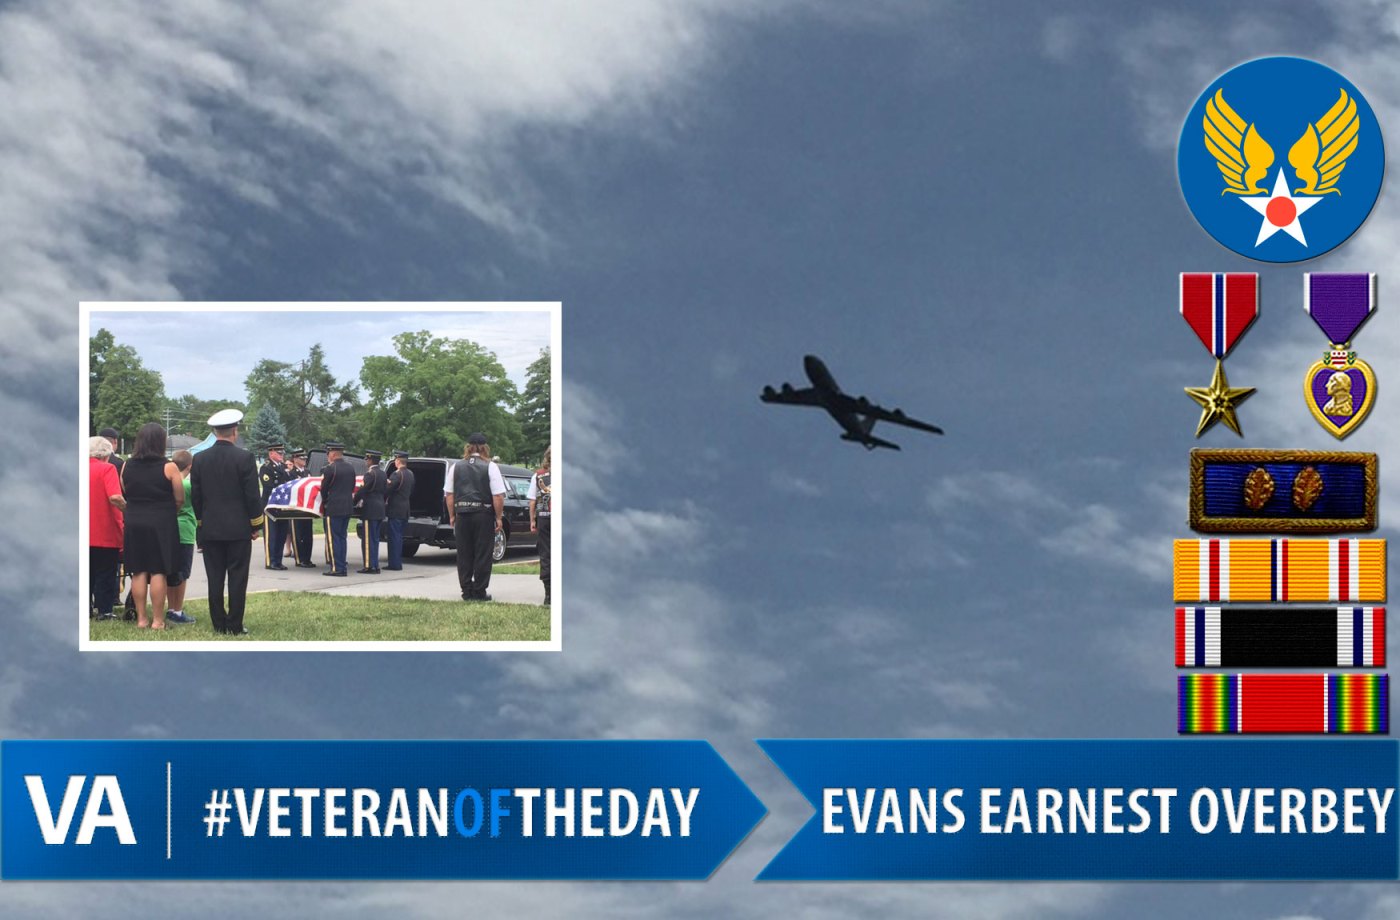 Veteran of the Day Evans Earnest Overbey